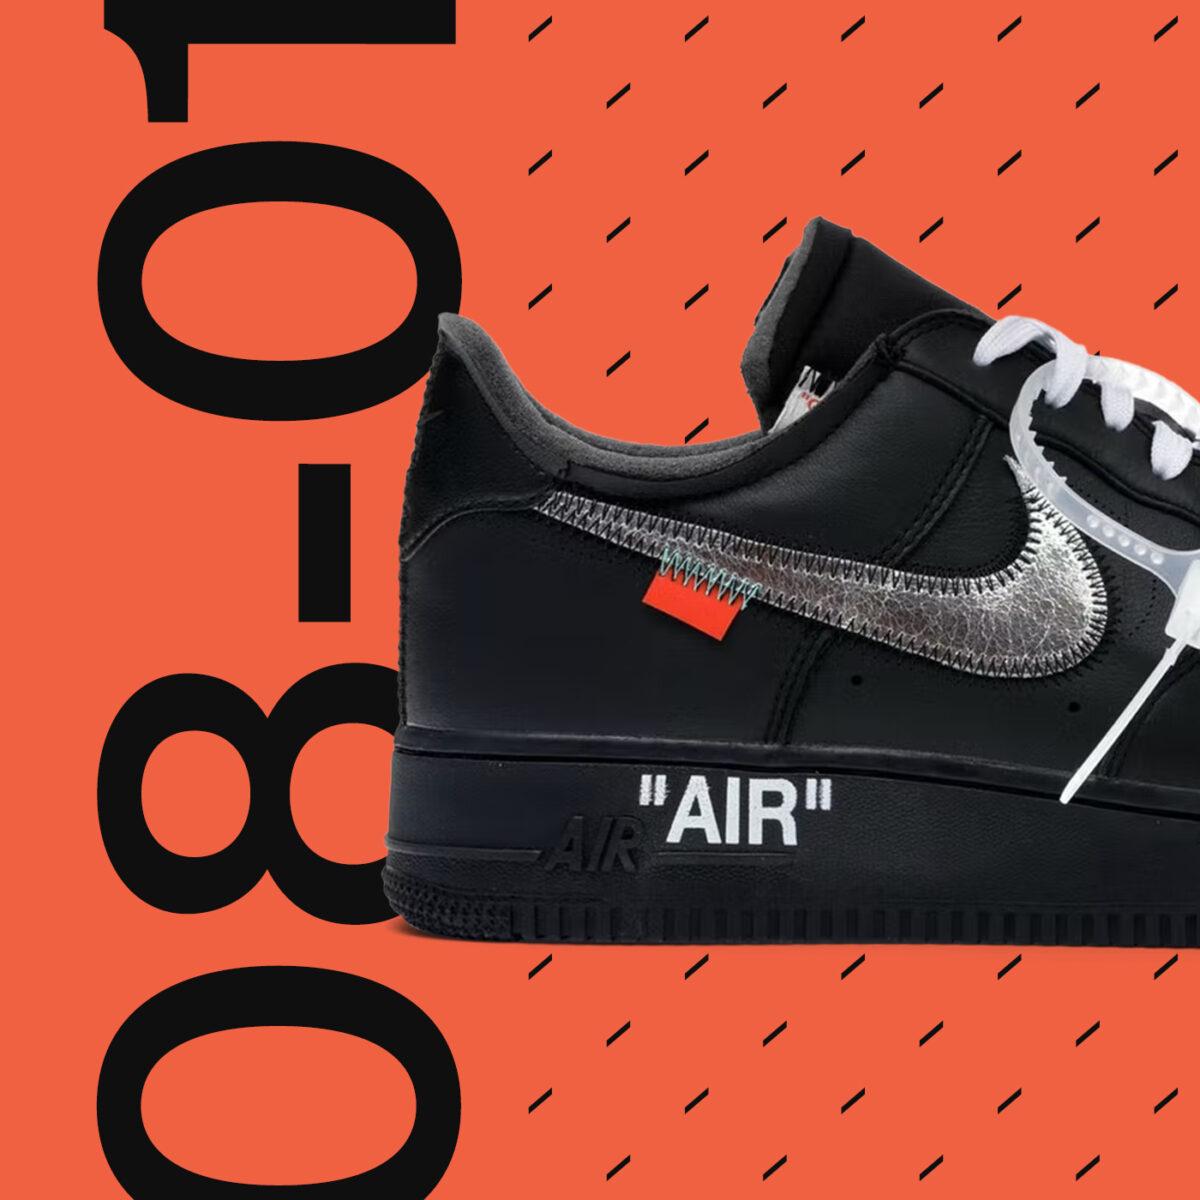 Nike x Off-White Air Force 1 MoMa  Nike shoes outfits, Black nike